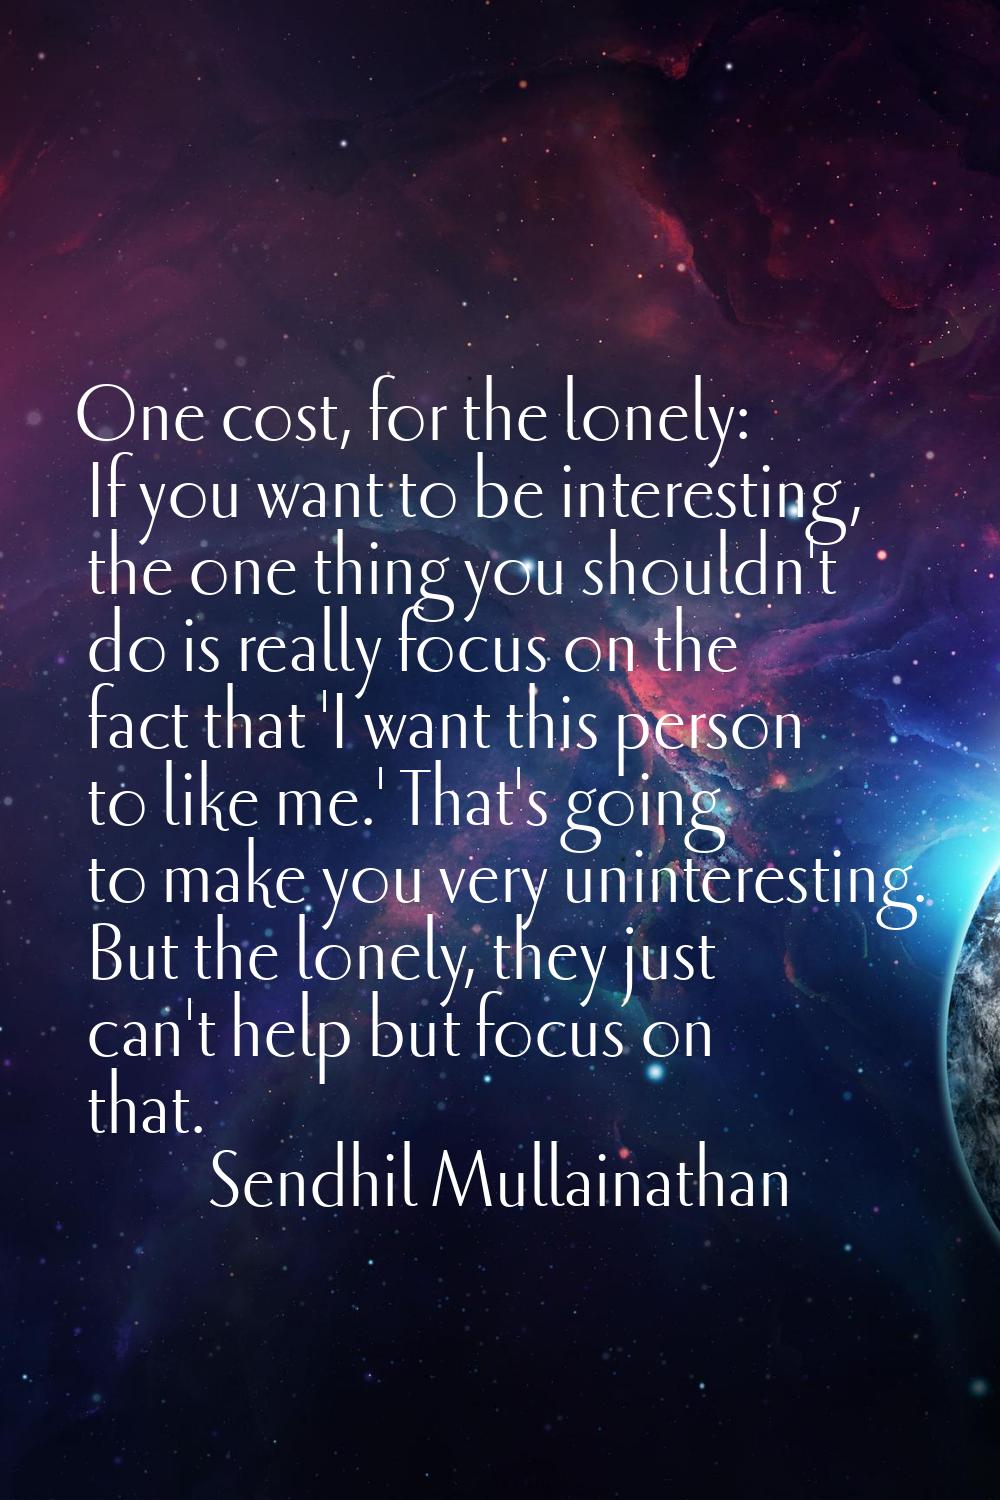 One cost, for the lonely: If you want to be interesting, the one thing you shouldn't do is really f